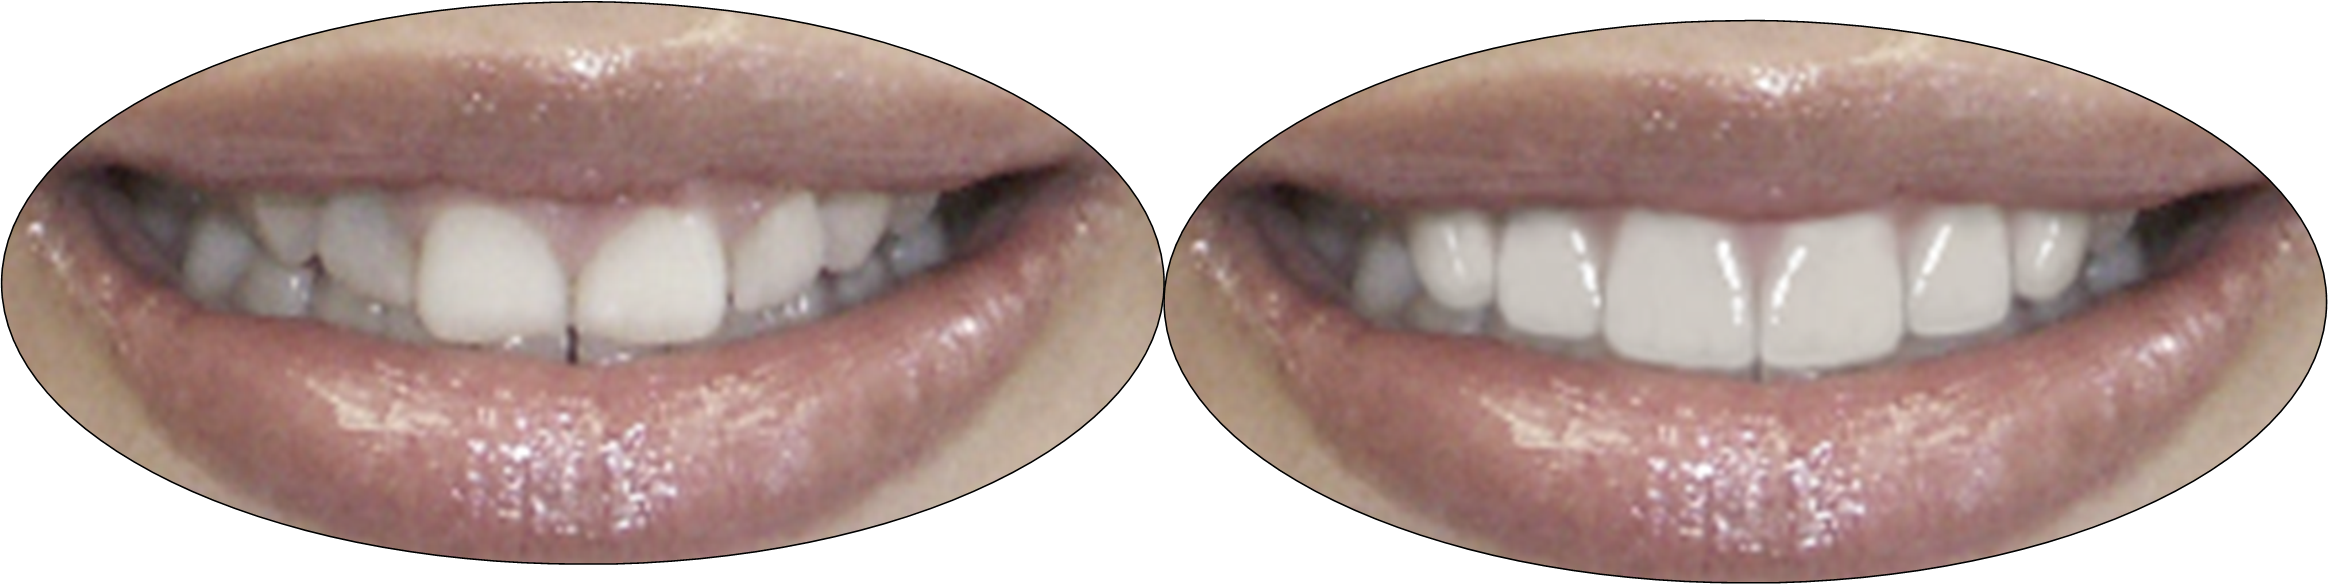 Smile gallery images, before and after crown lengthening and porcelain veneers